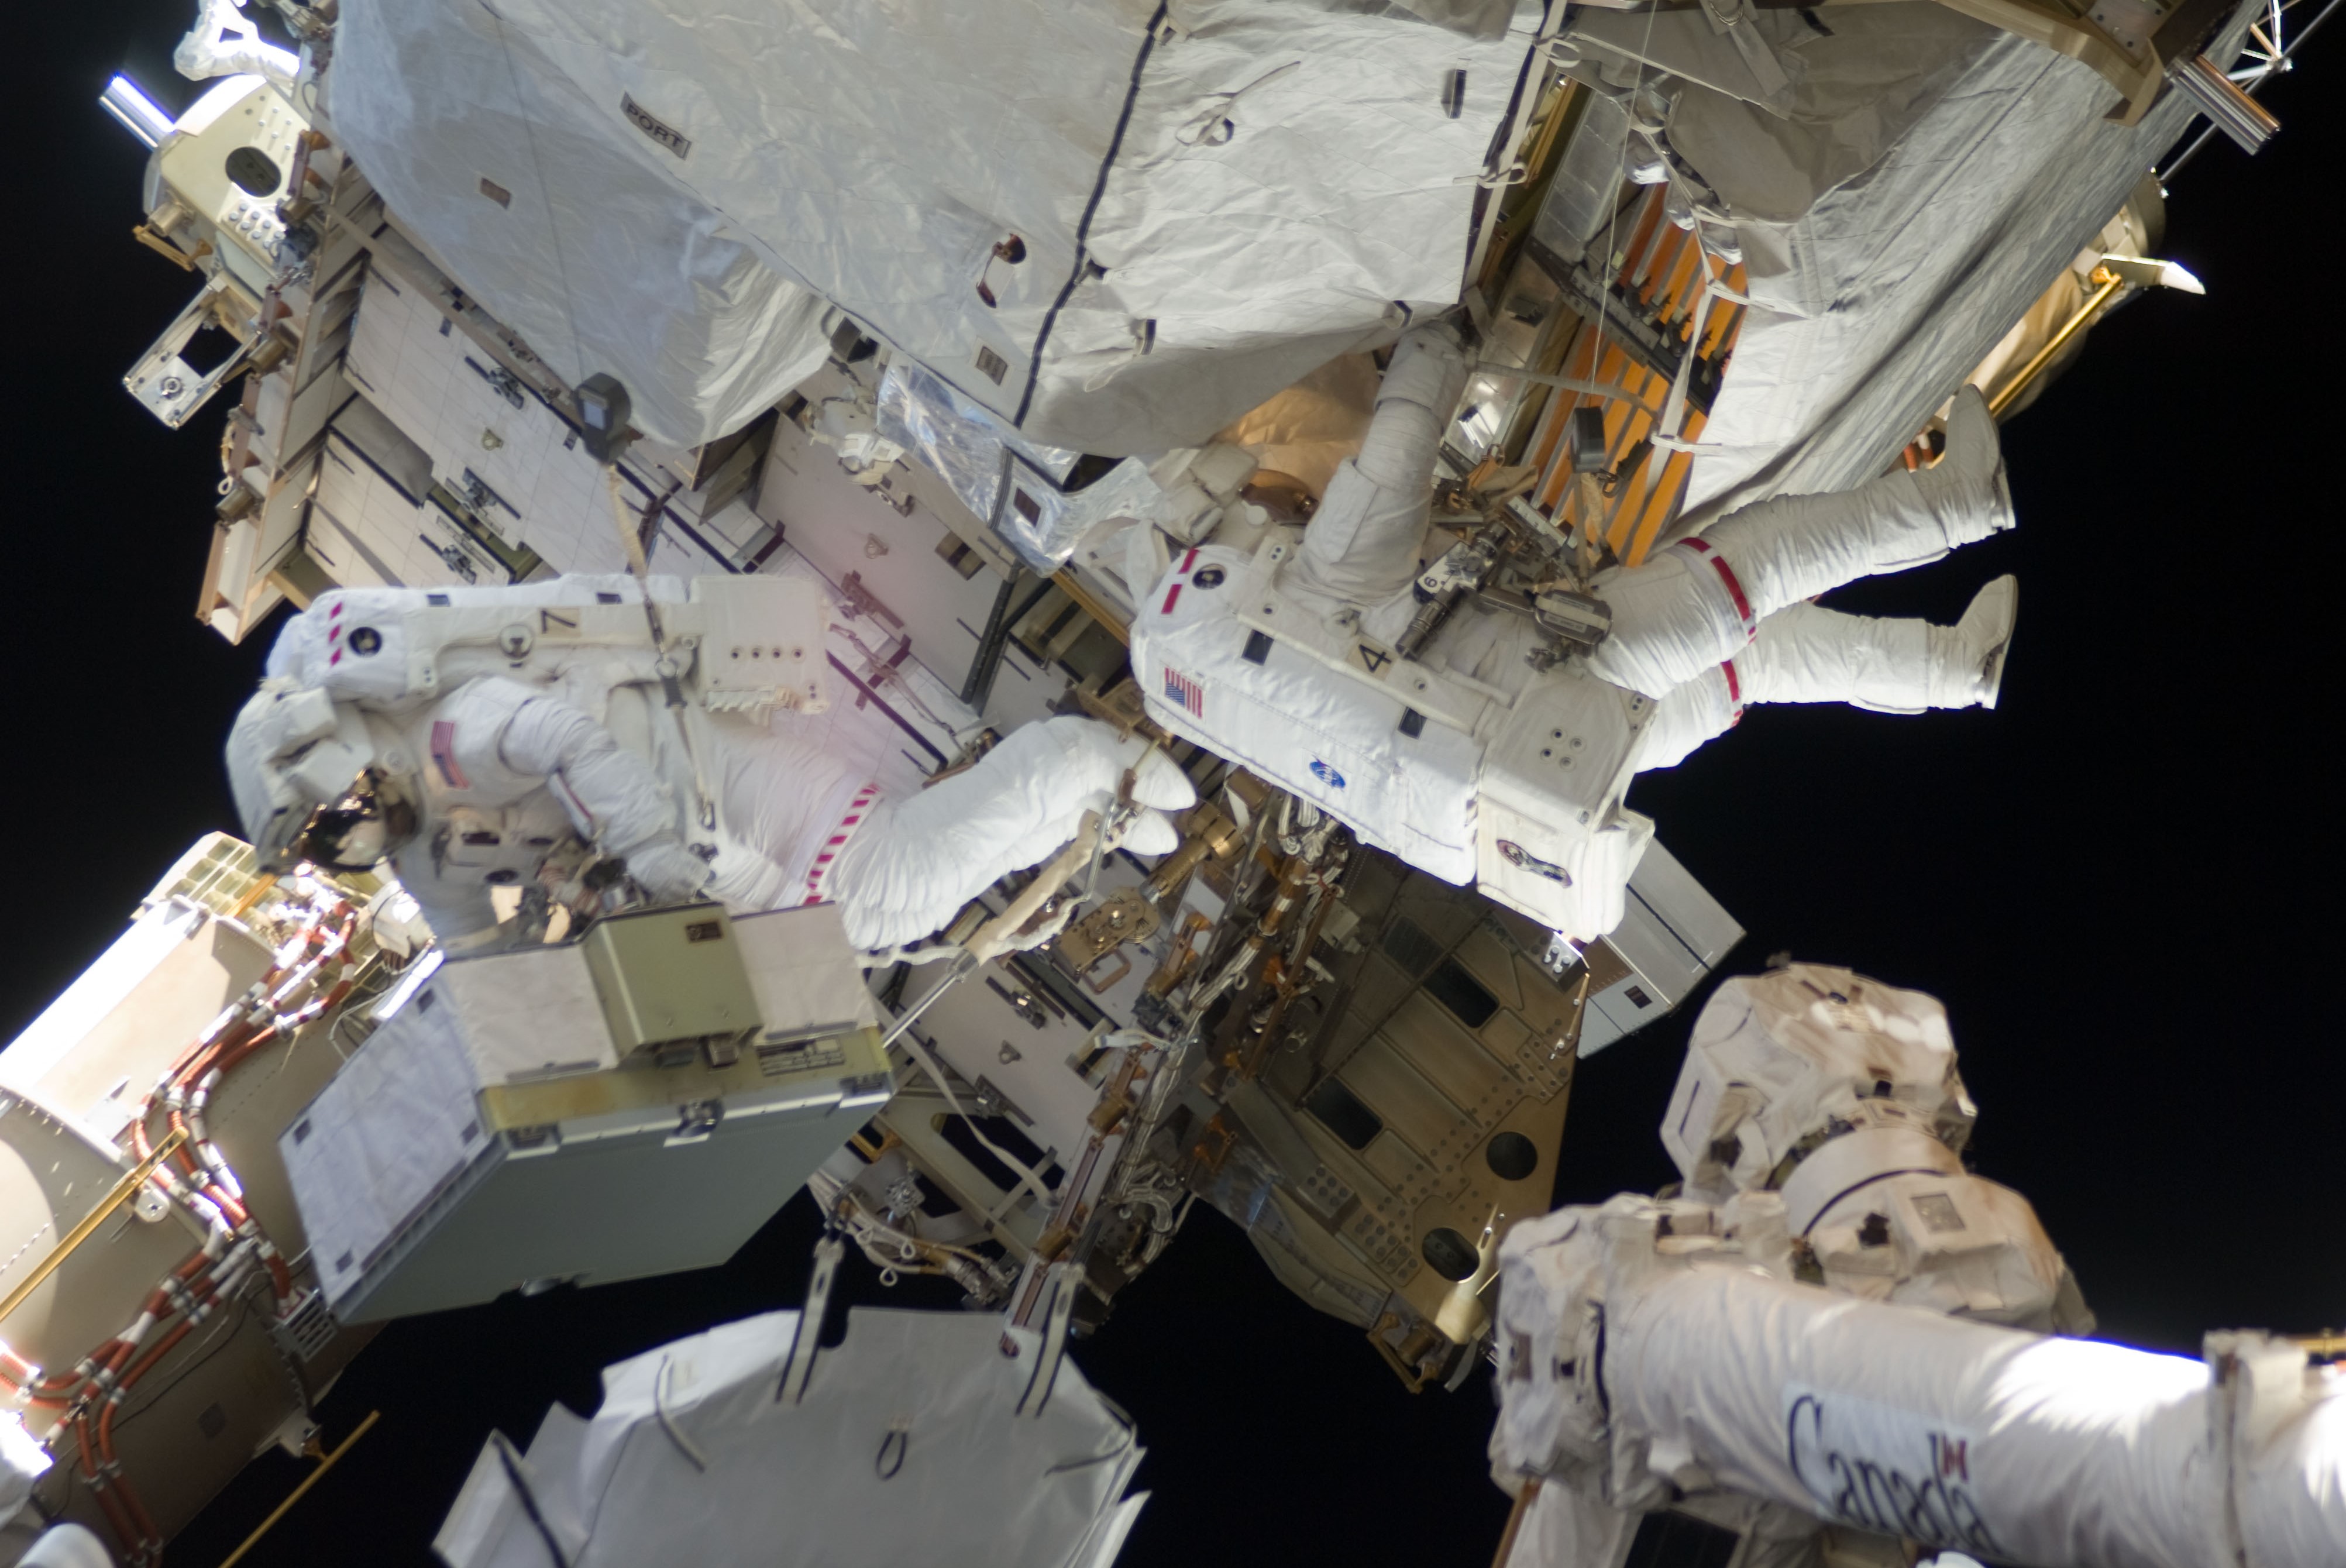 Christopher J. Cassidy, left, and Thomas H. Marshburn exchange space station batteries during the mission’s fourth spacewalk